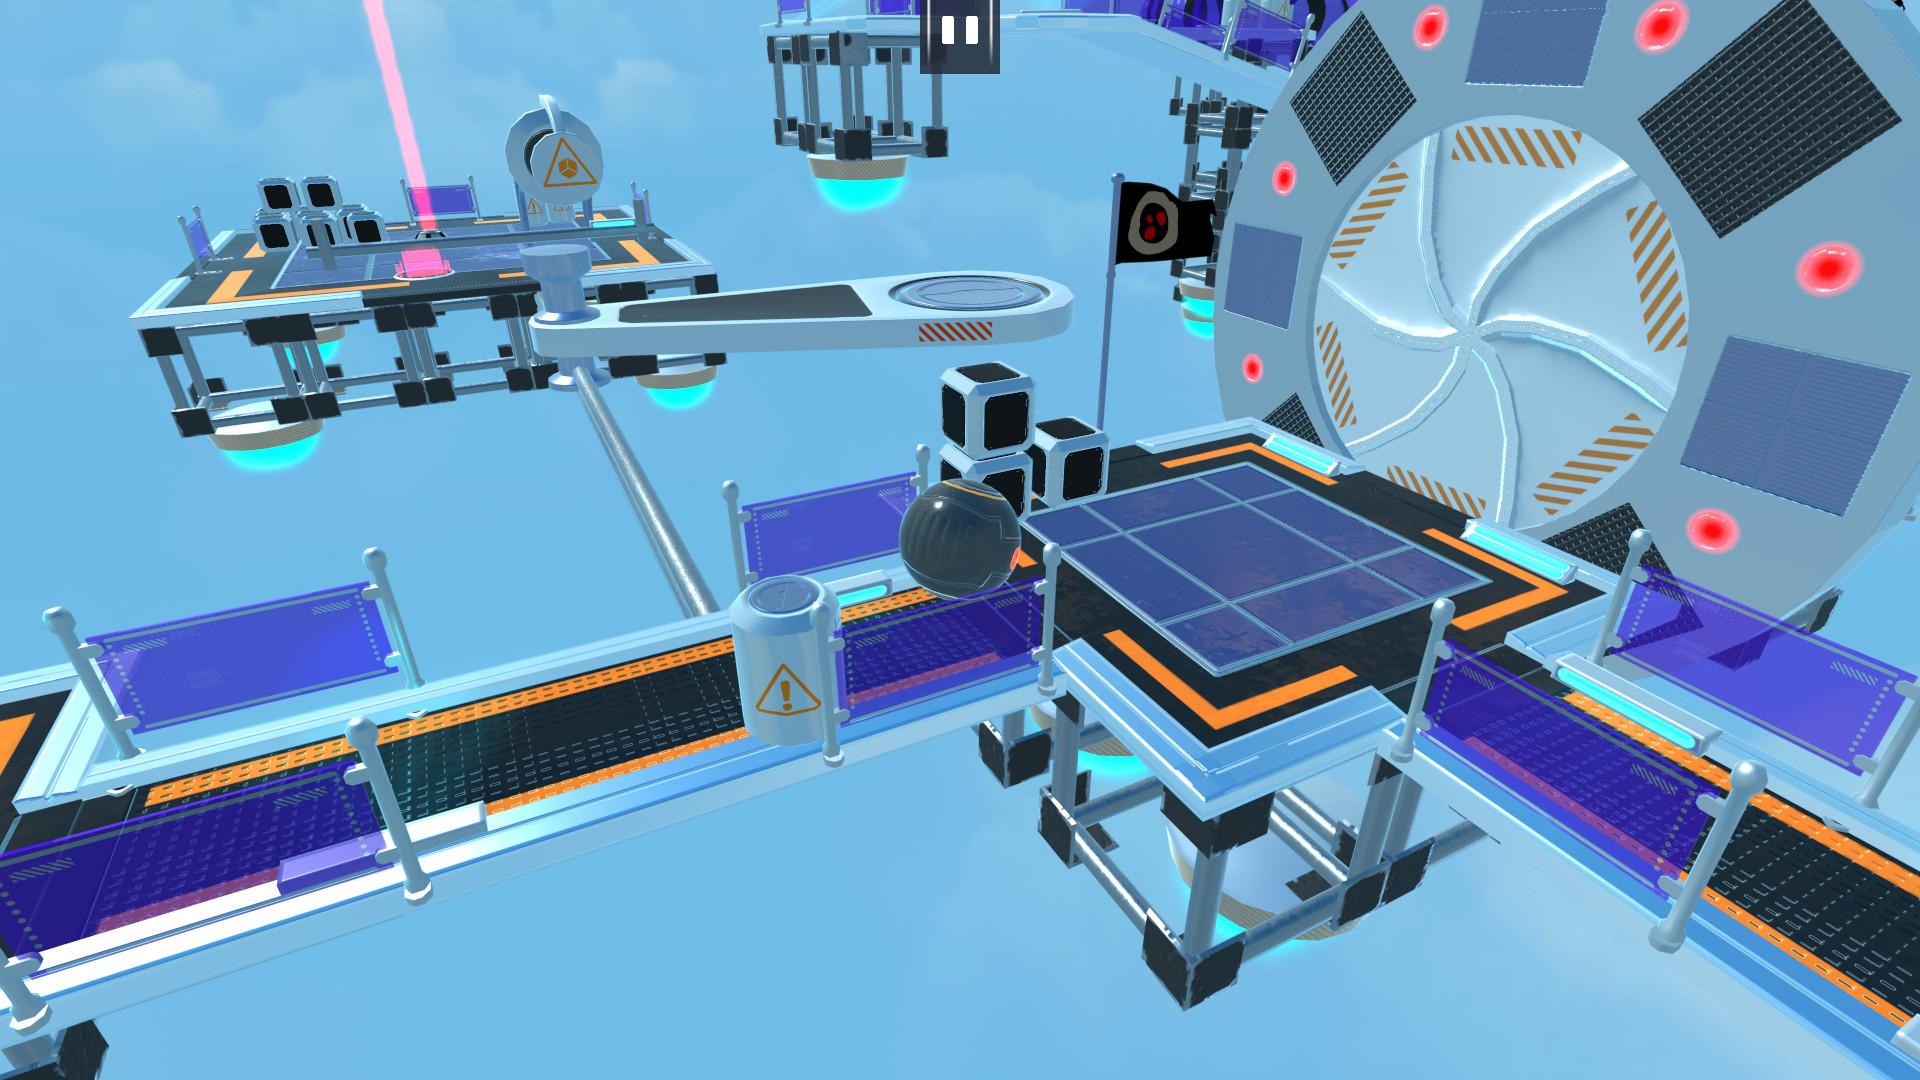 Roboball - Android game screenshots.